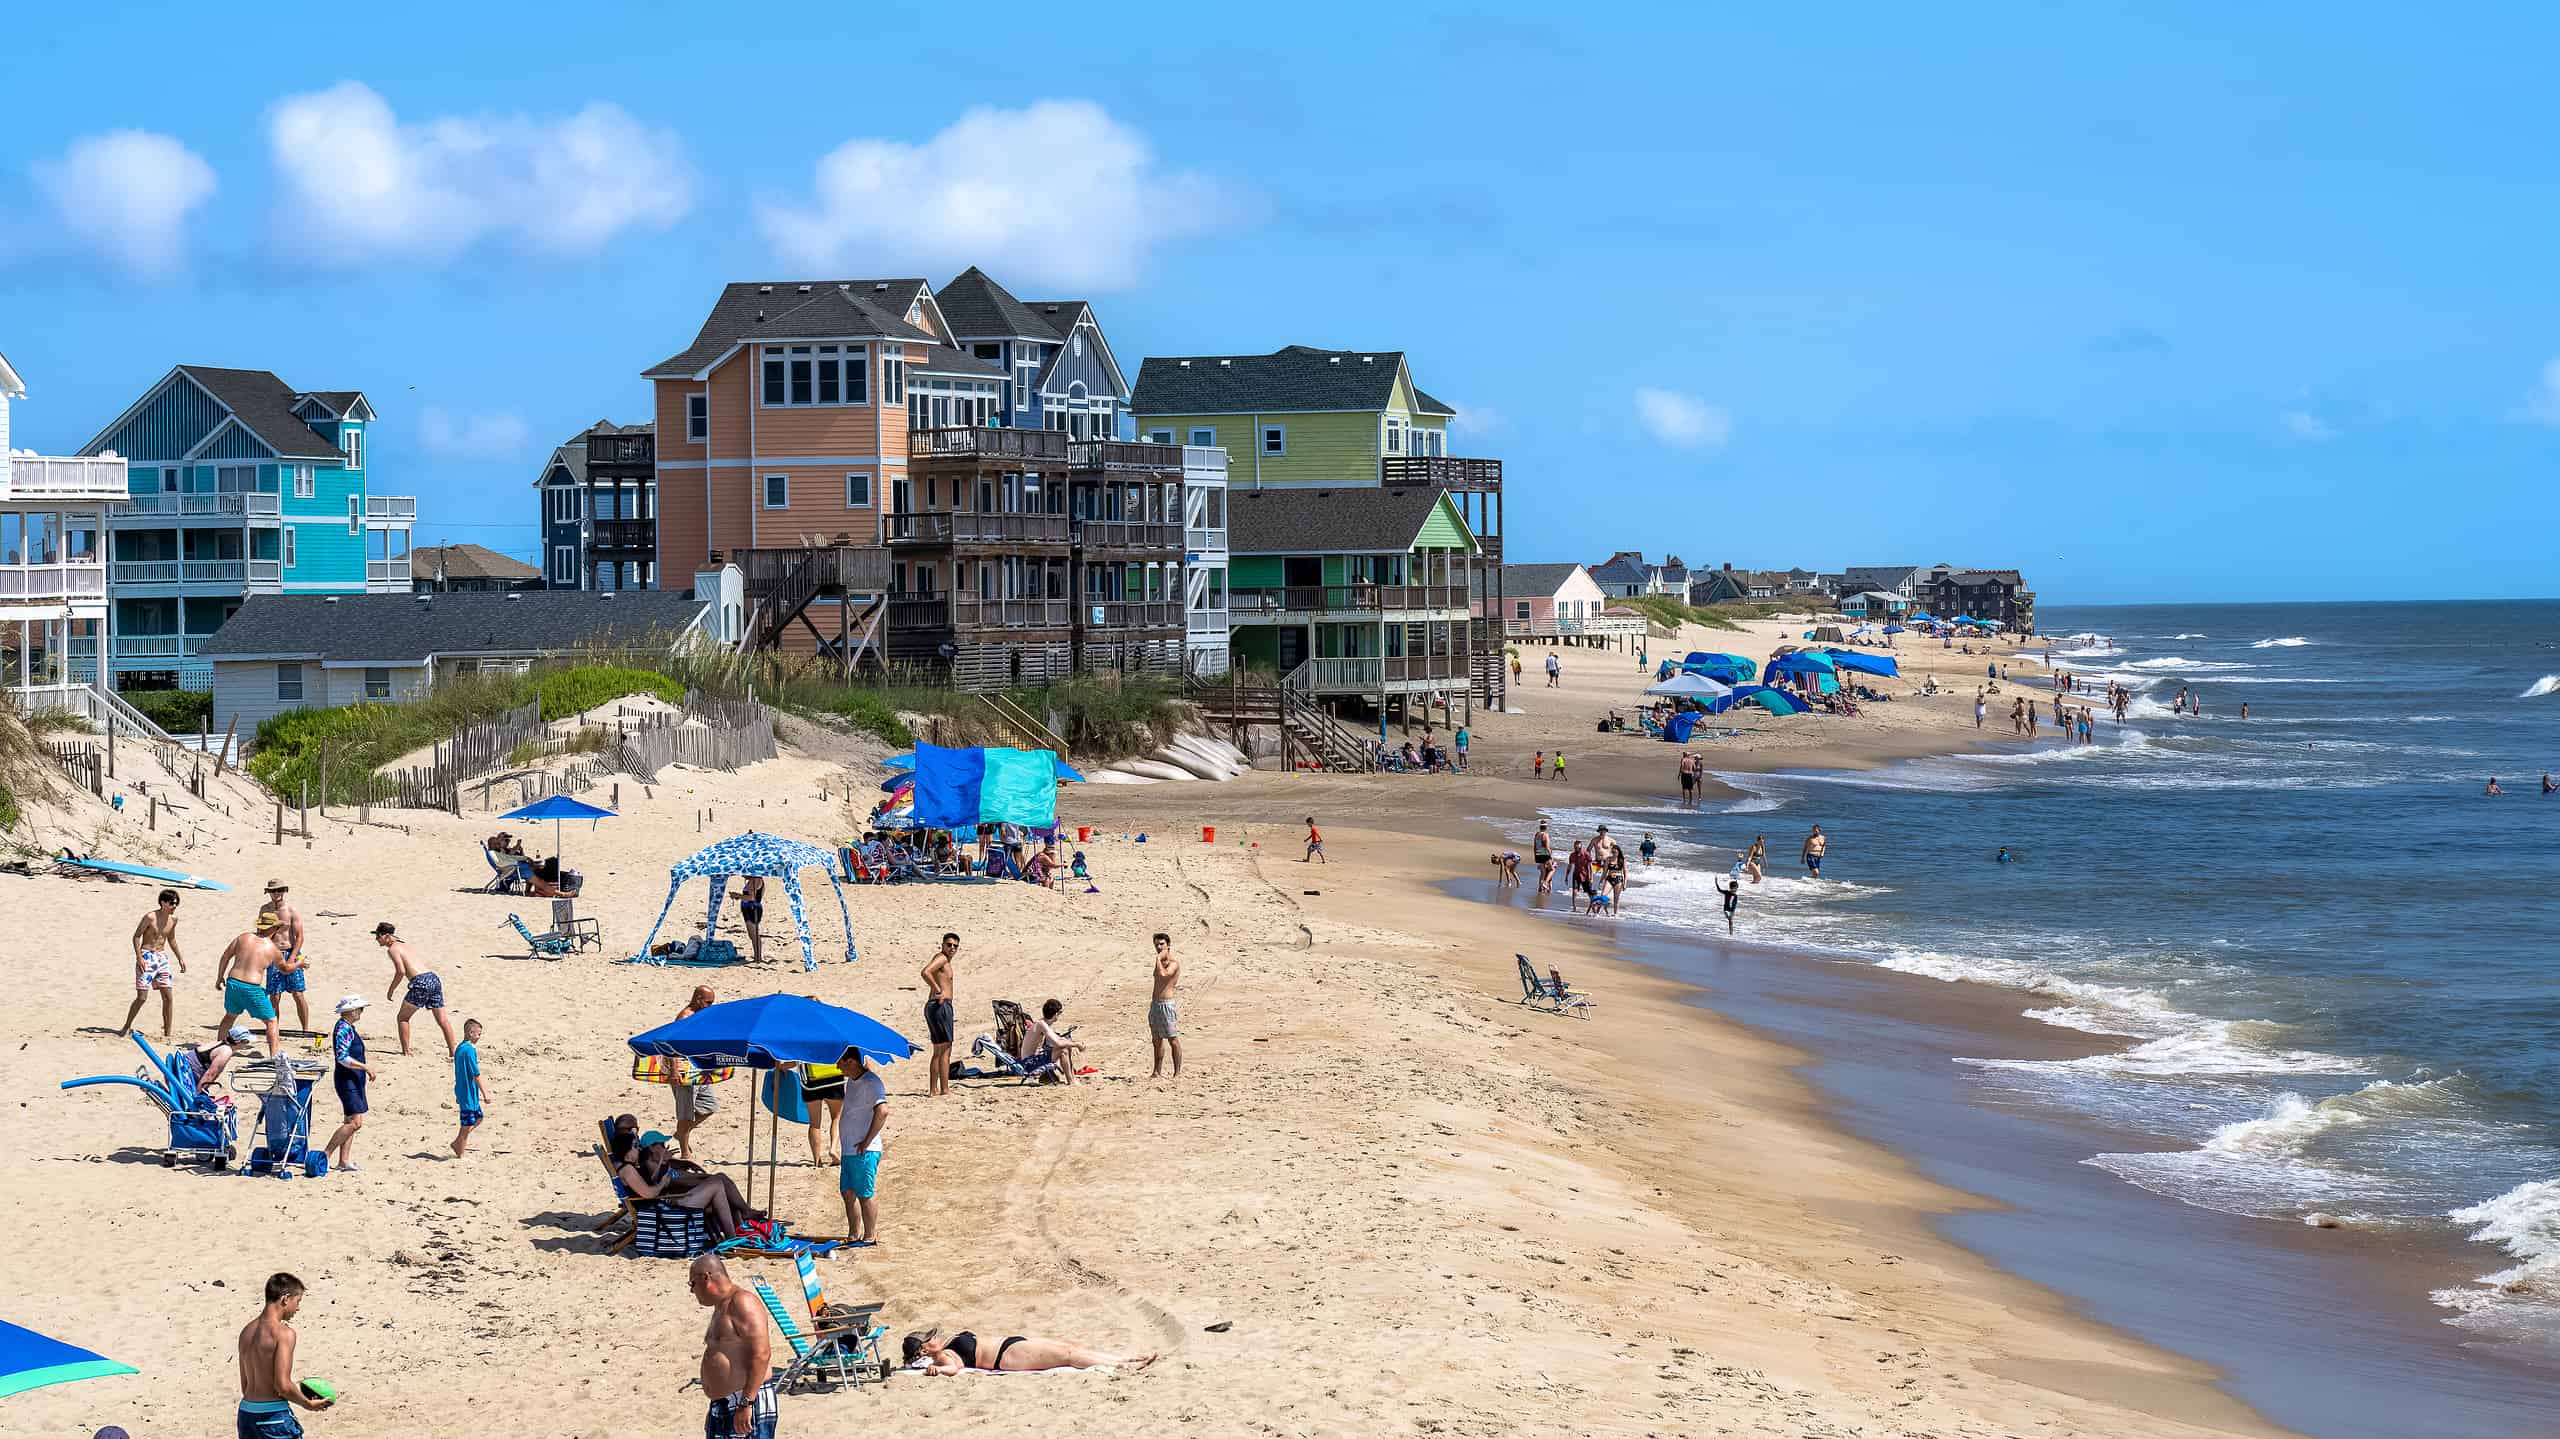 Rodanthe North Carolina - July 17 2022: View of people and vacation homes on the beach as seen from the Rodanthe Pier in the Outer Banks